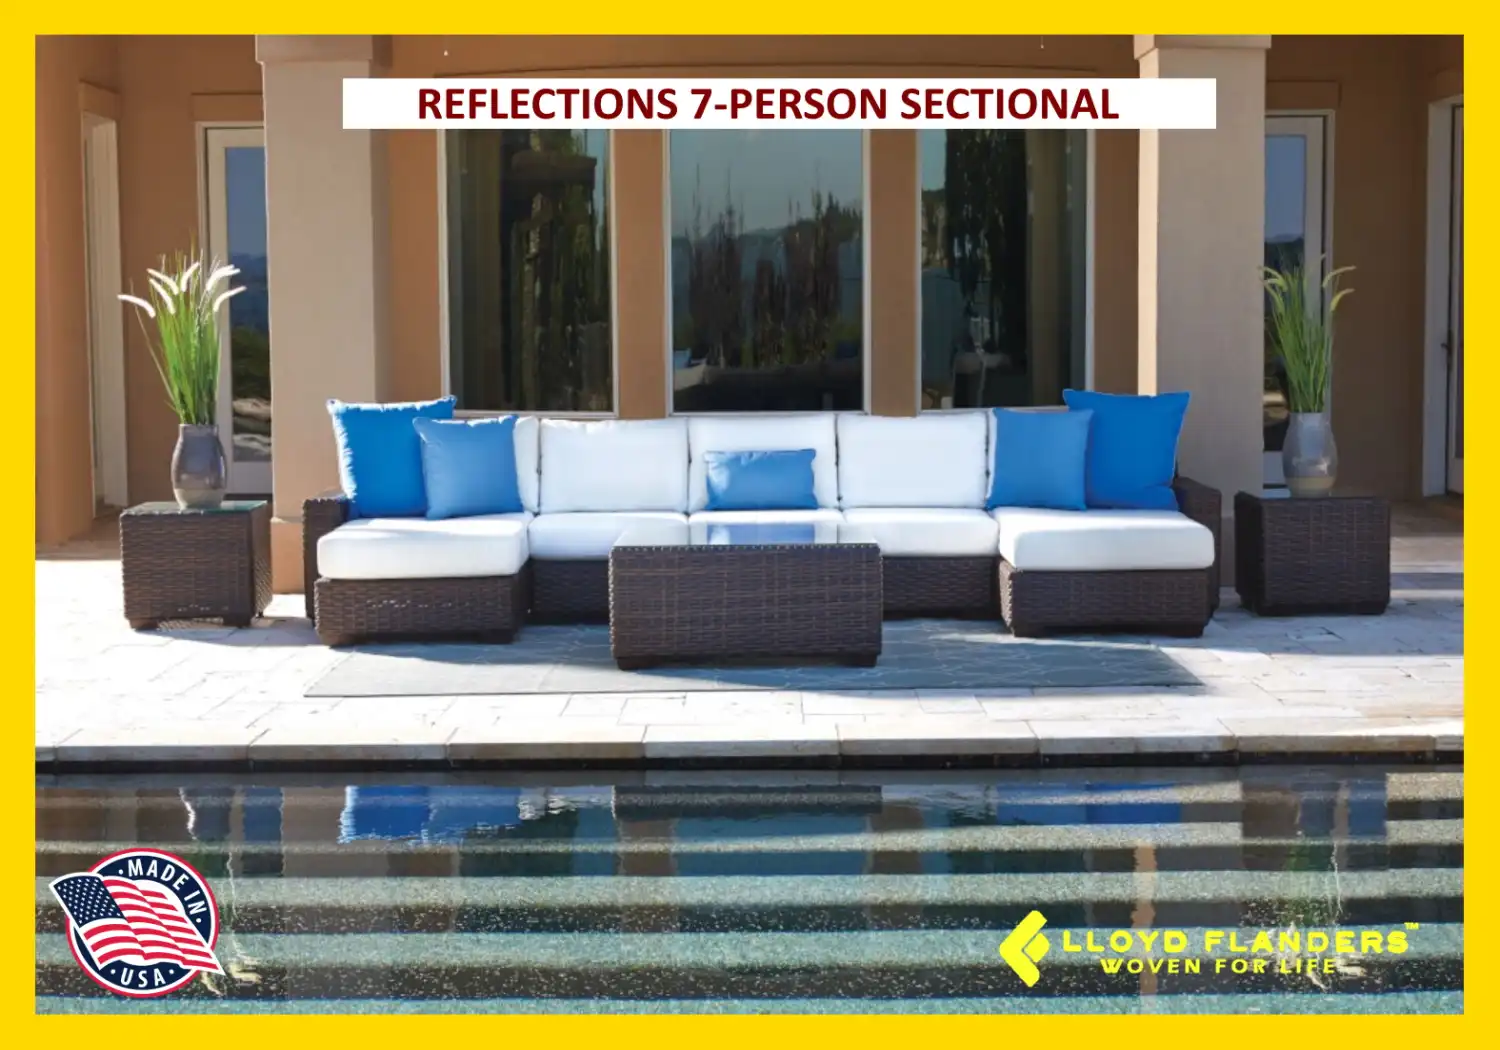 REFLECTIONS 7-PERSON SECTIONAL